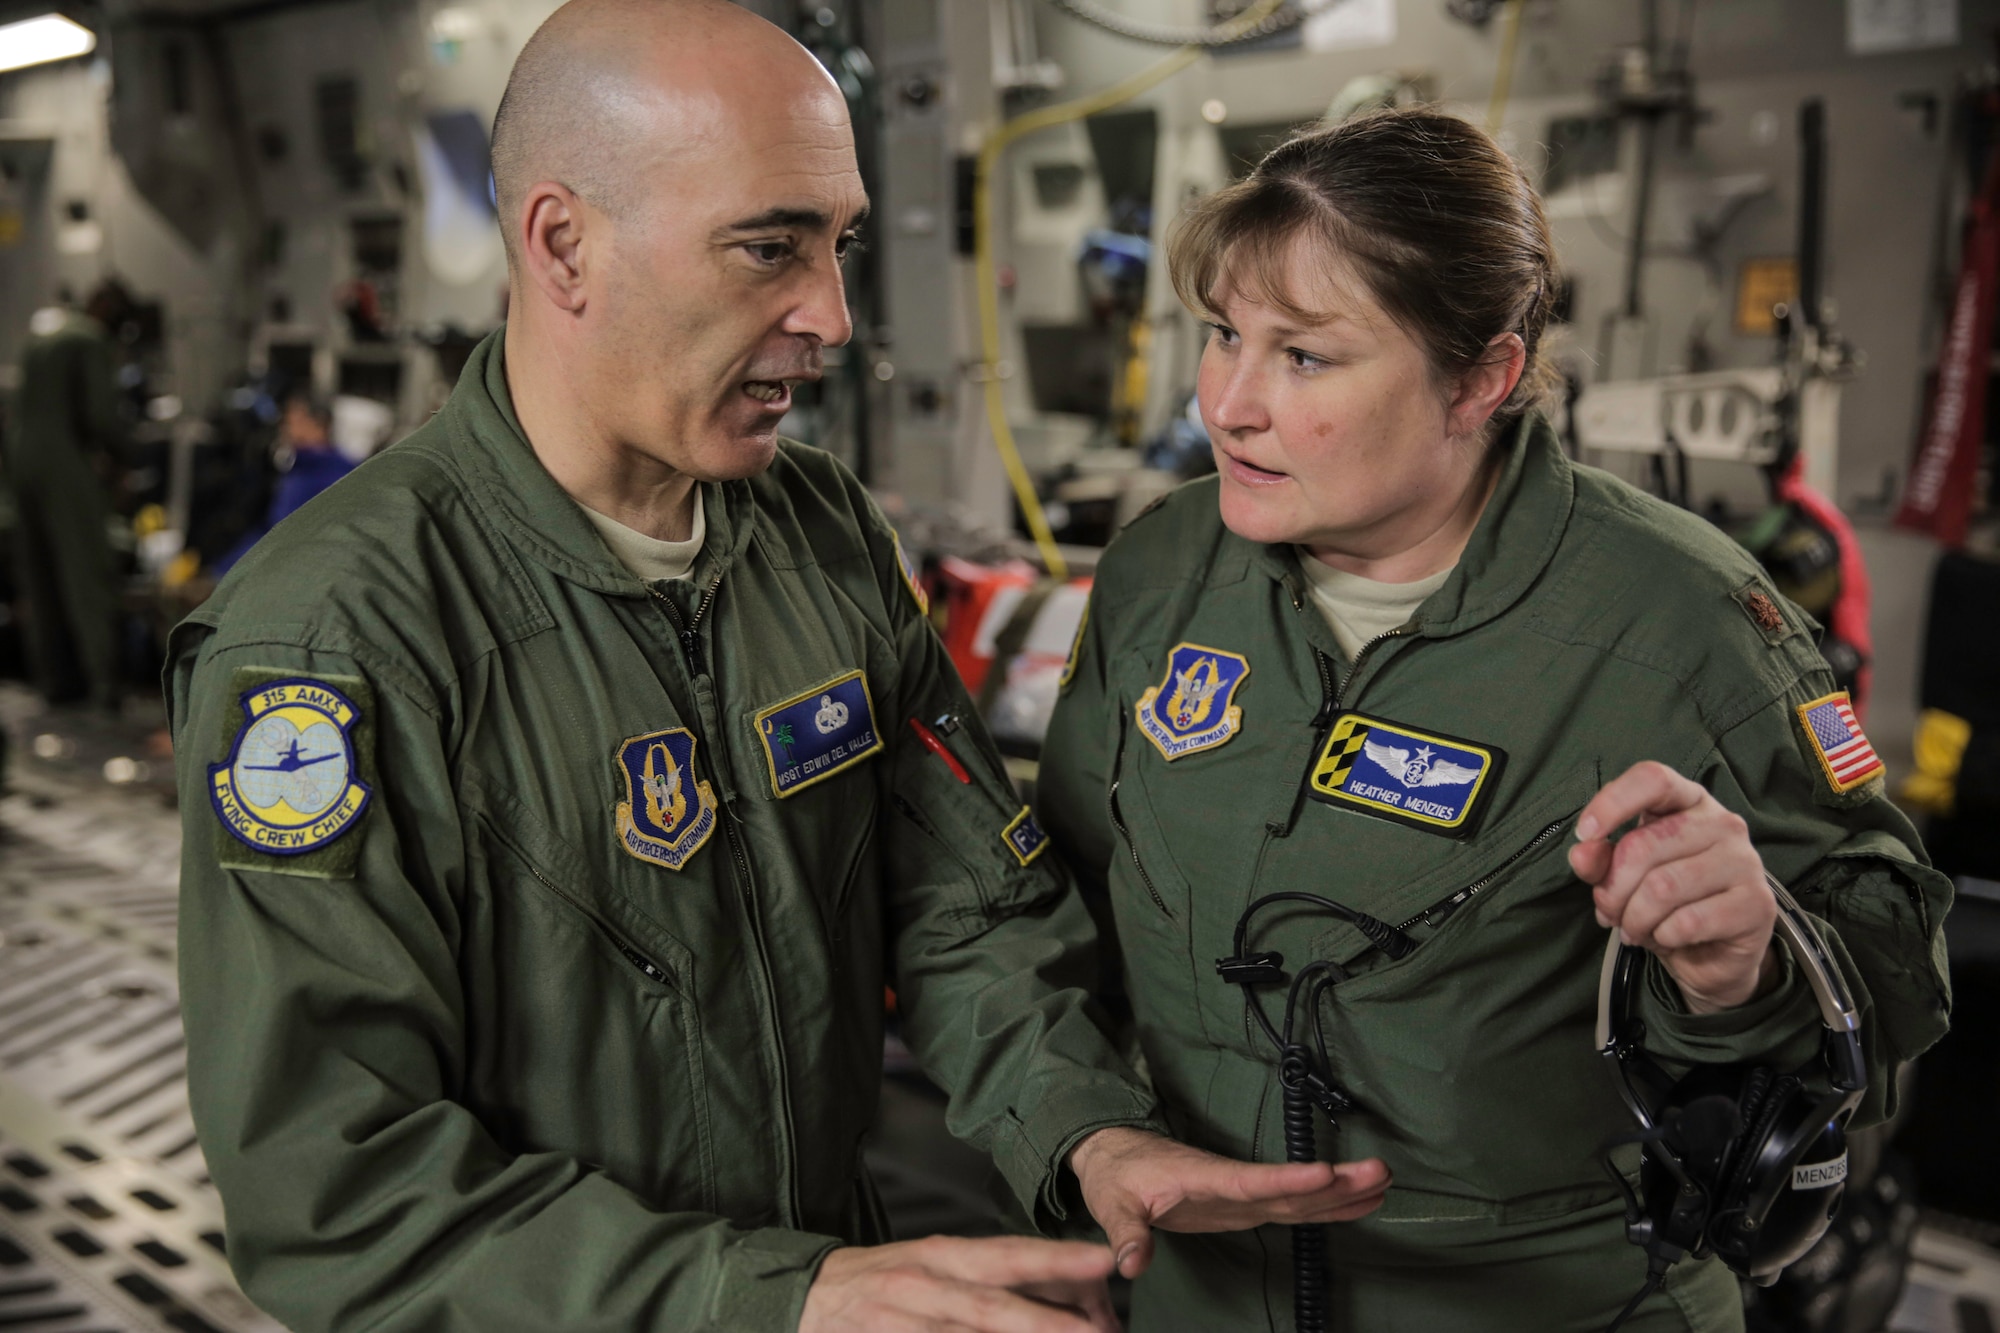 Master Sgt. Edwin Del Valle discusses the electrical system of the C-17 with Maj. Heather Menzies Feb. 22, 2015 during a training mission in San Juan, Puerto Rico. The mission was part of a three day fly-away with Airmen from the 315th Airlift Wing at Joint Base Charleston, S.C. and aeromedical Airmen from the 459th Air Refueling Wing at Joint Base Andrews, Md. The training mission was a cost-effective means to accomplish currency items and evaluations for flight crew members and provided C-17 familiarization and proficiency training for aeromedical Airmen. Del Valle is a flying crew chief with the 315th Aircraft Maintenance Squadron and Menzies is a Stan/Eval flight nurse with the 459th Operations Group (U.S. Air Force Photo/Tech. Sgt. Shane Ellis)